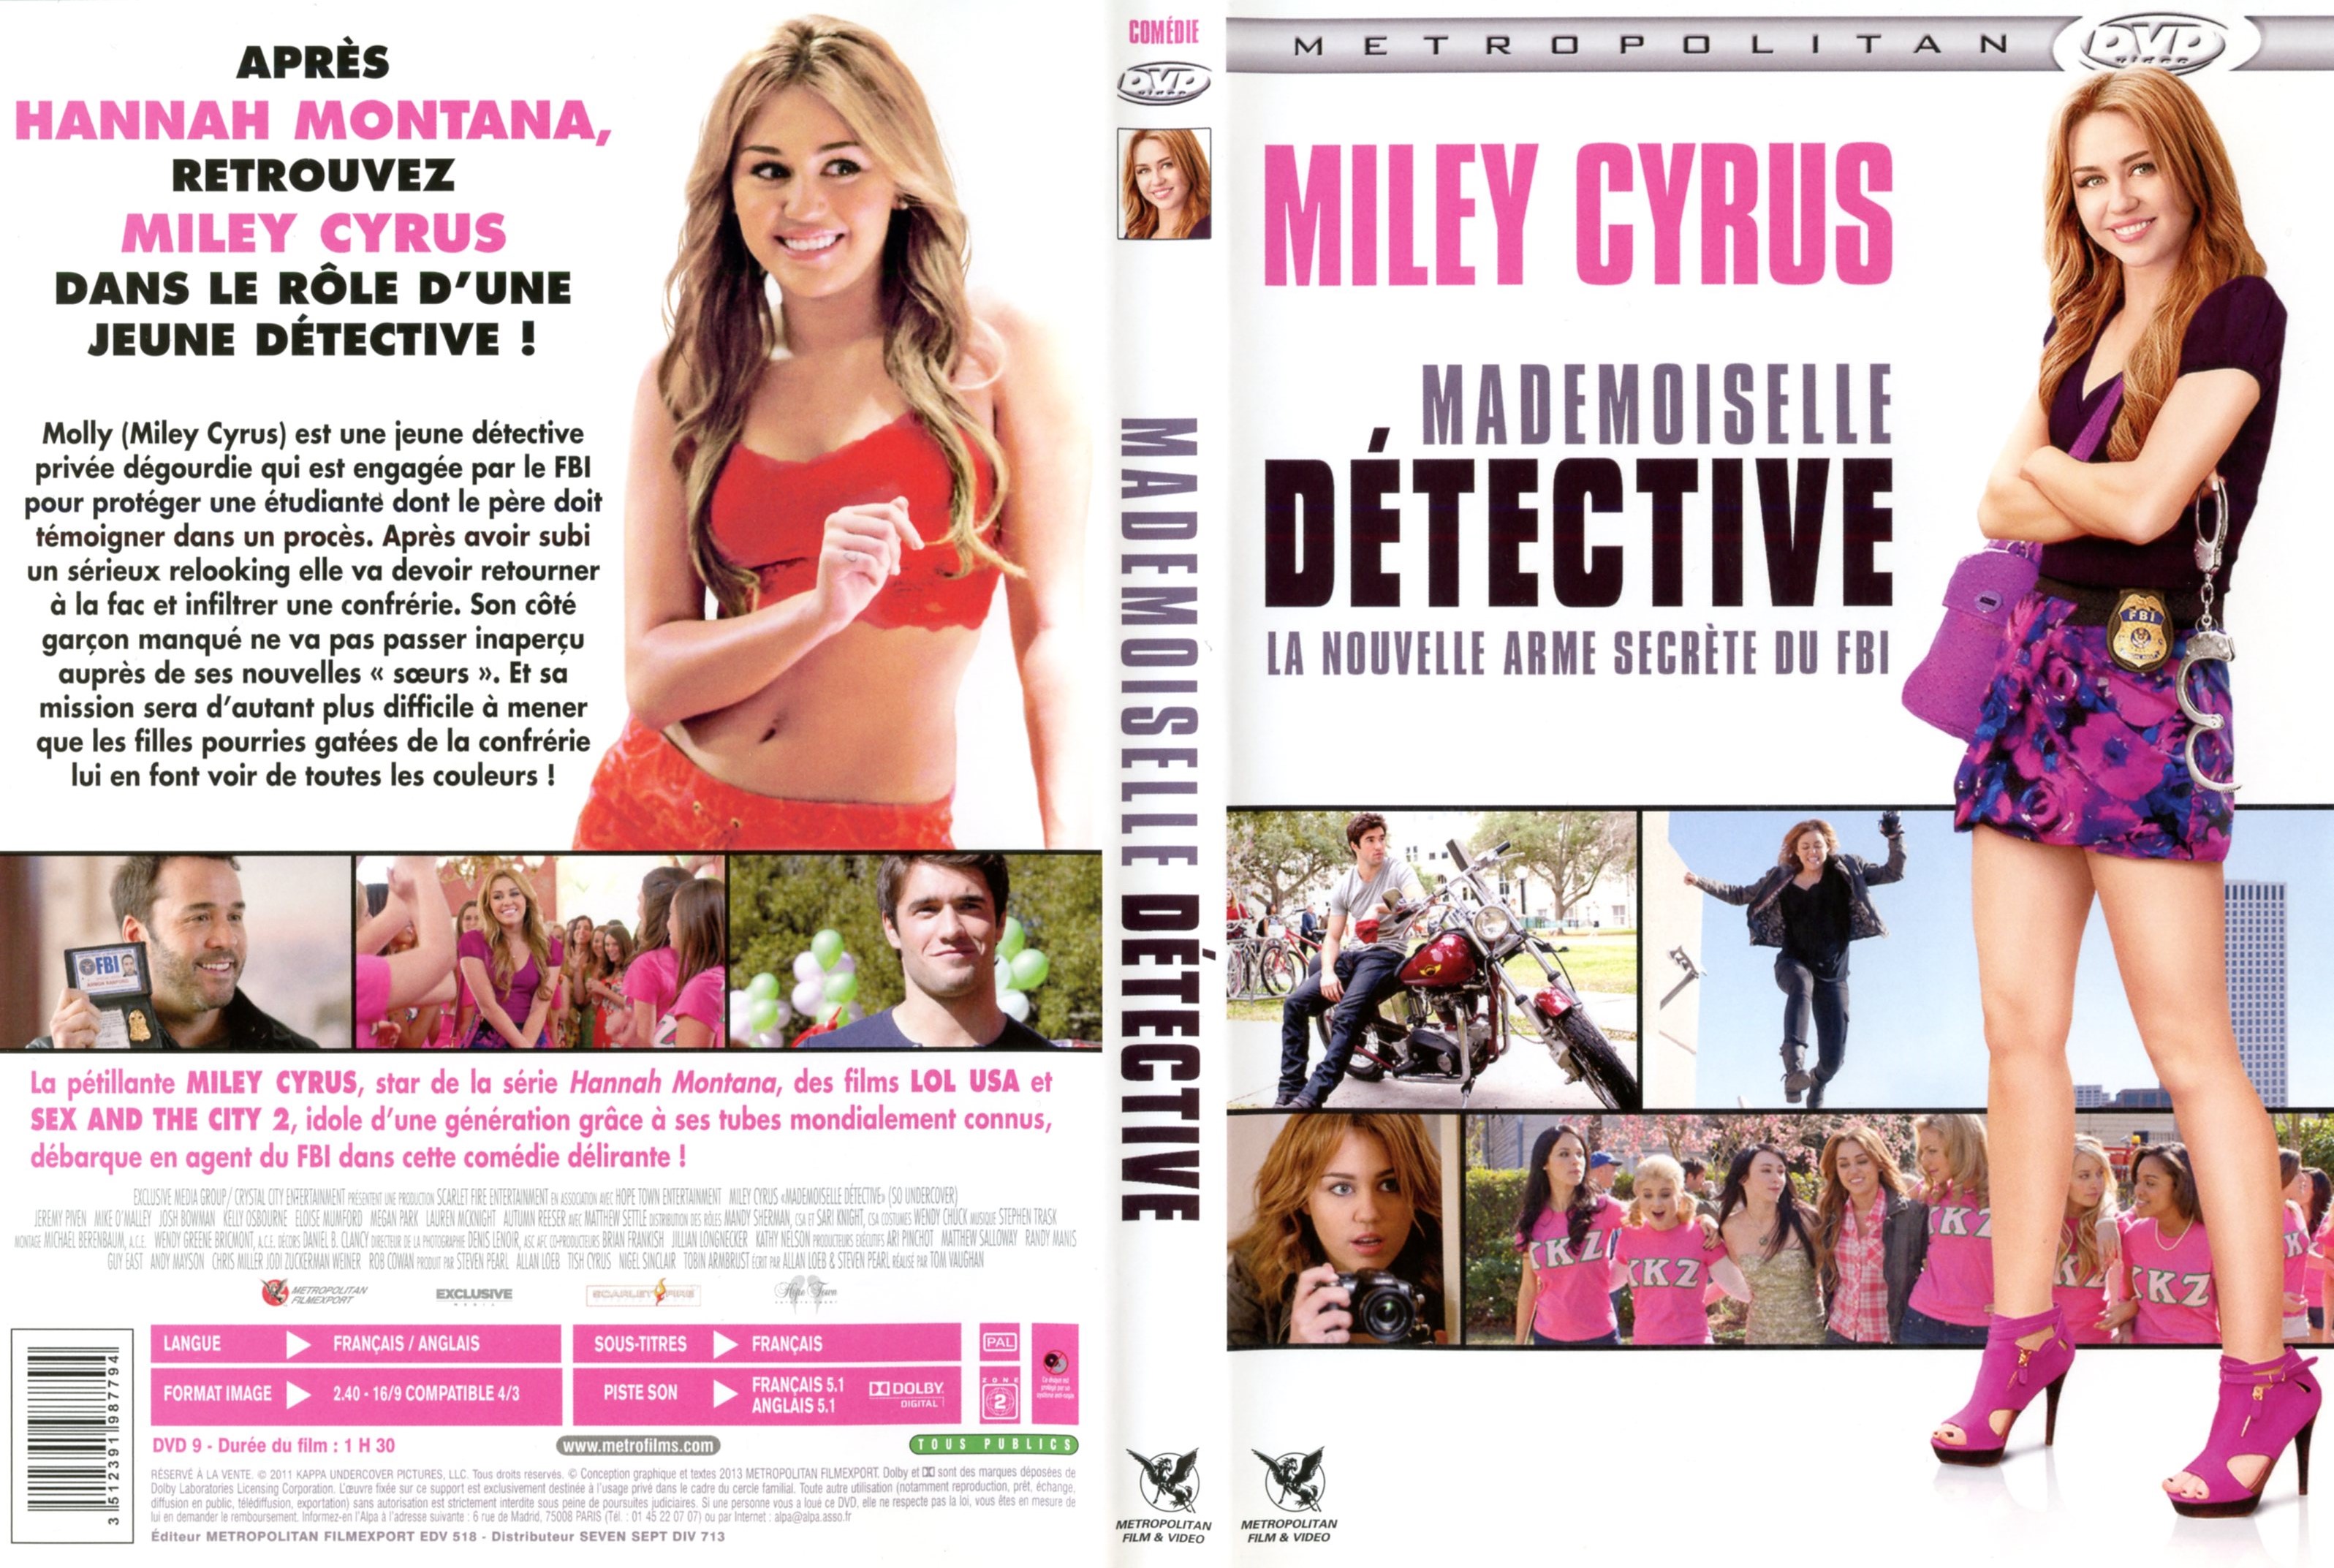 Jaquette DVD Mademoiselle Dtective